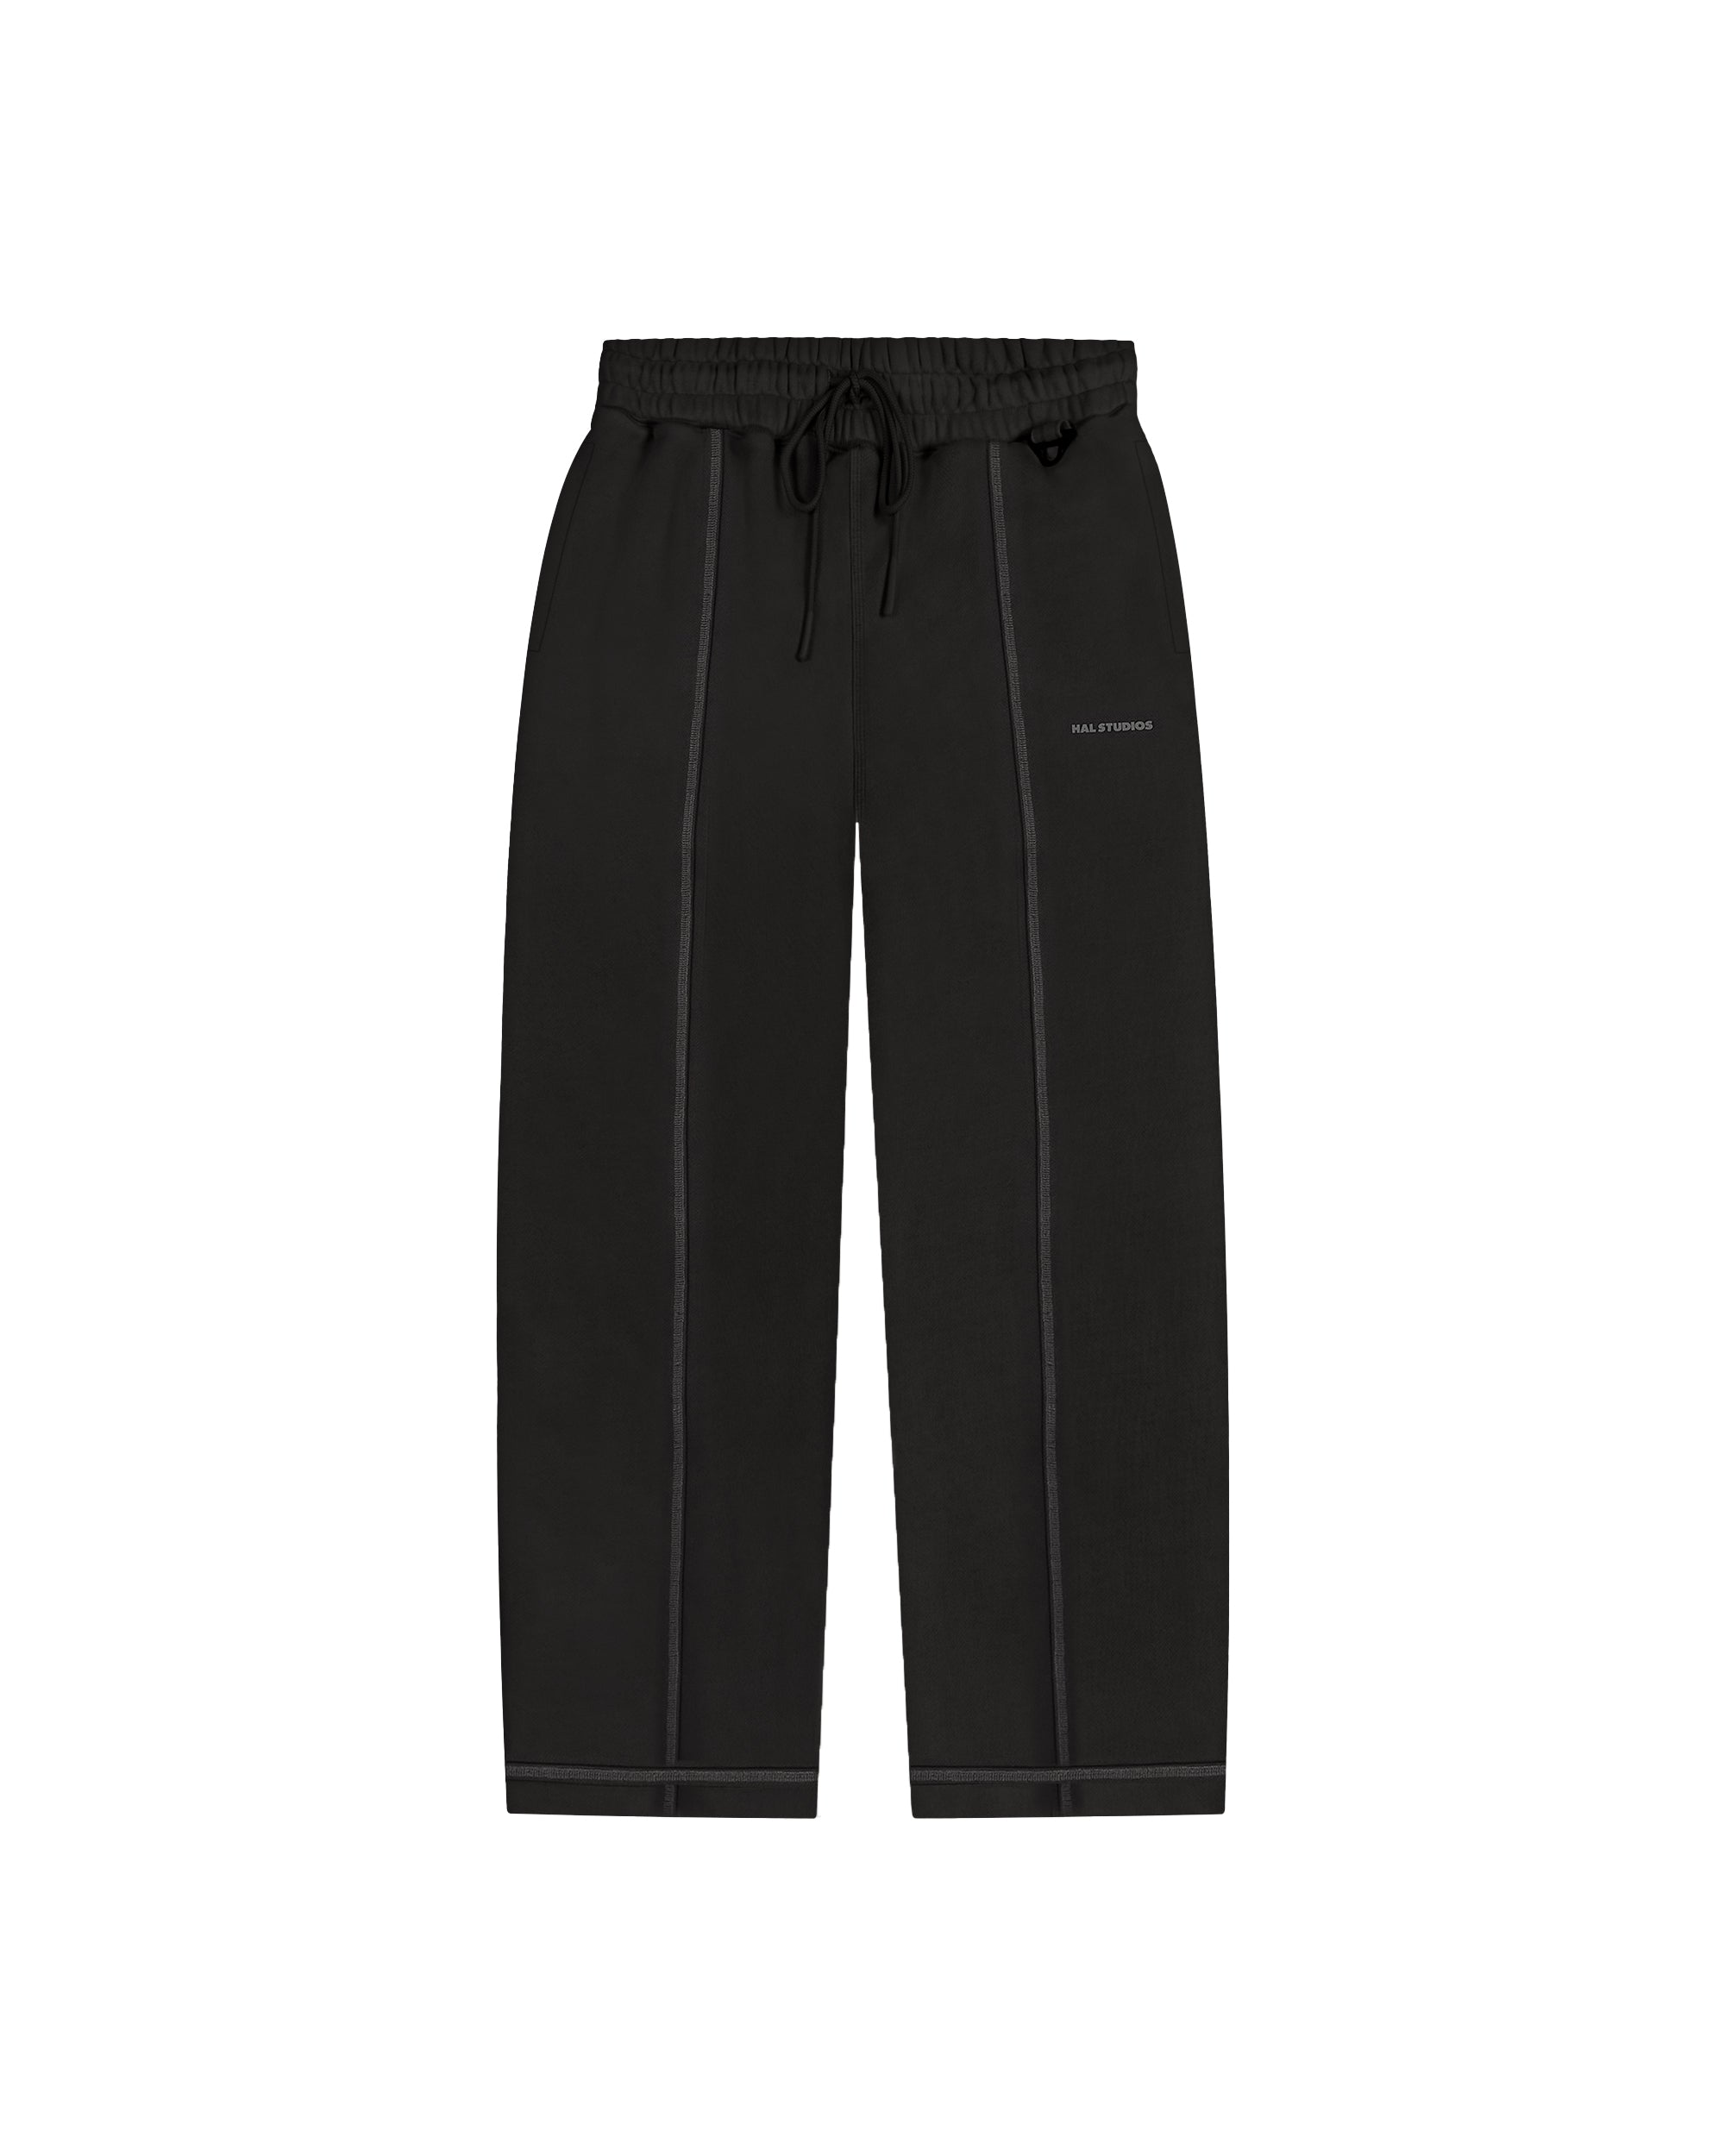 HAUS SWEATPANT - BLACK – HIGHS AND LOWS